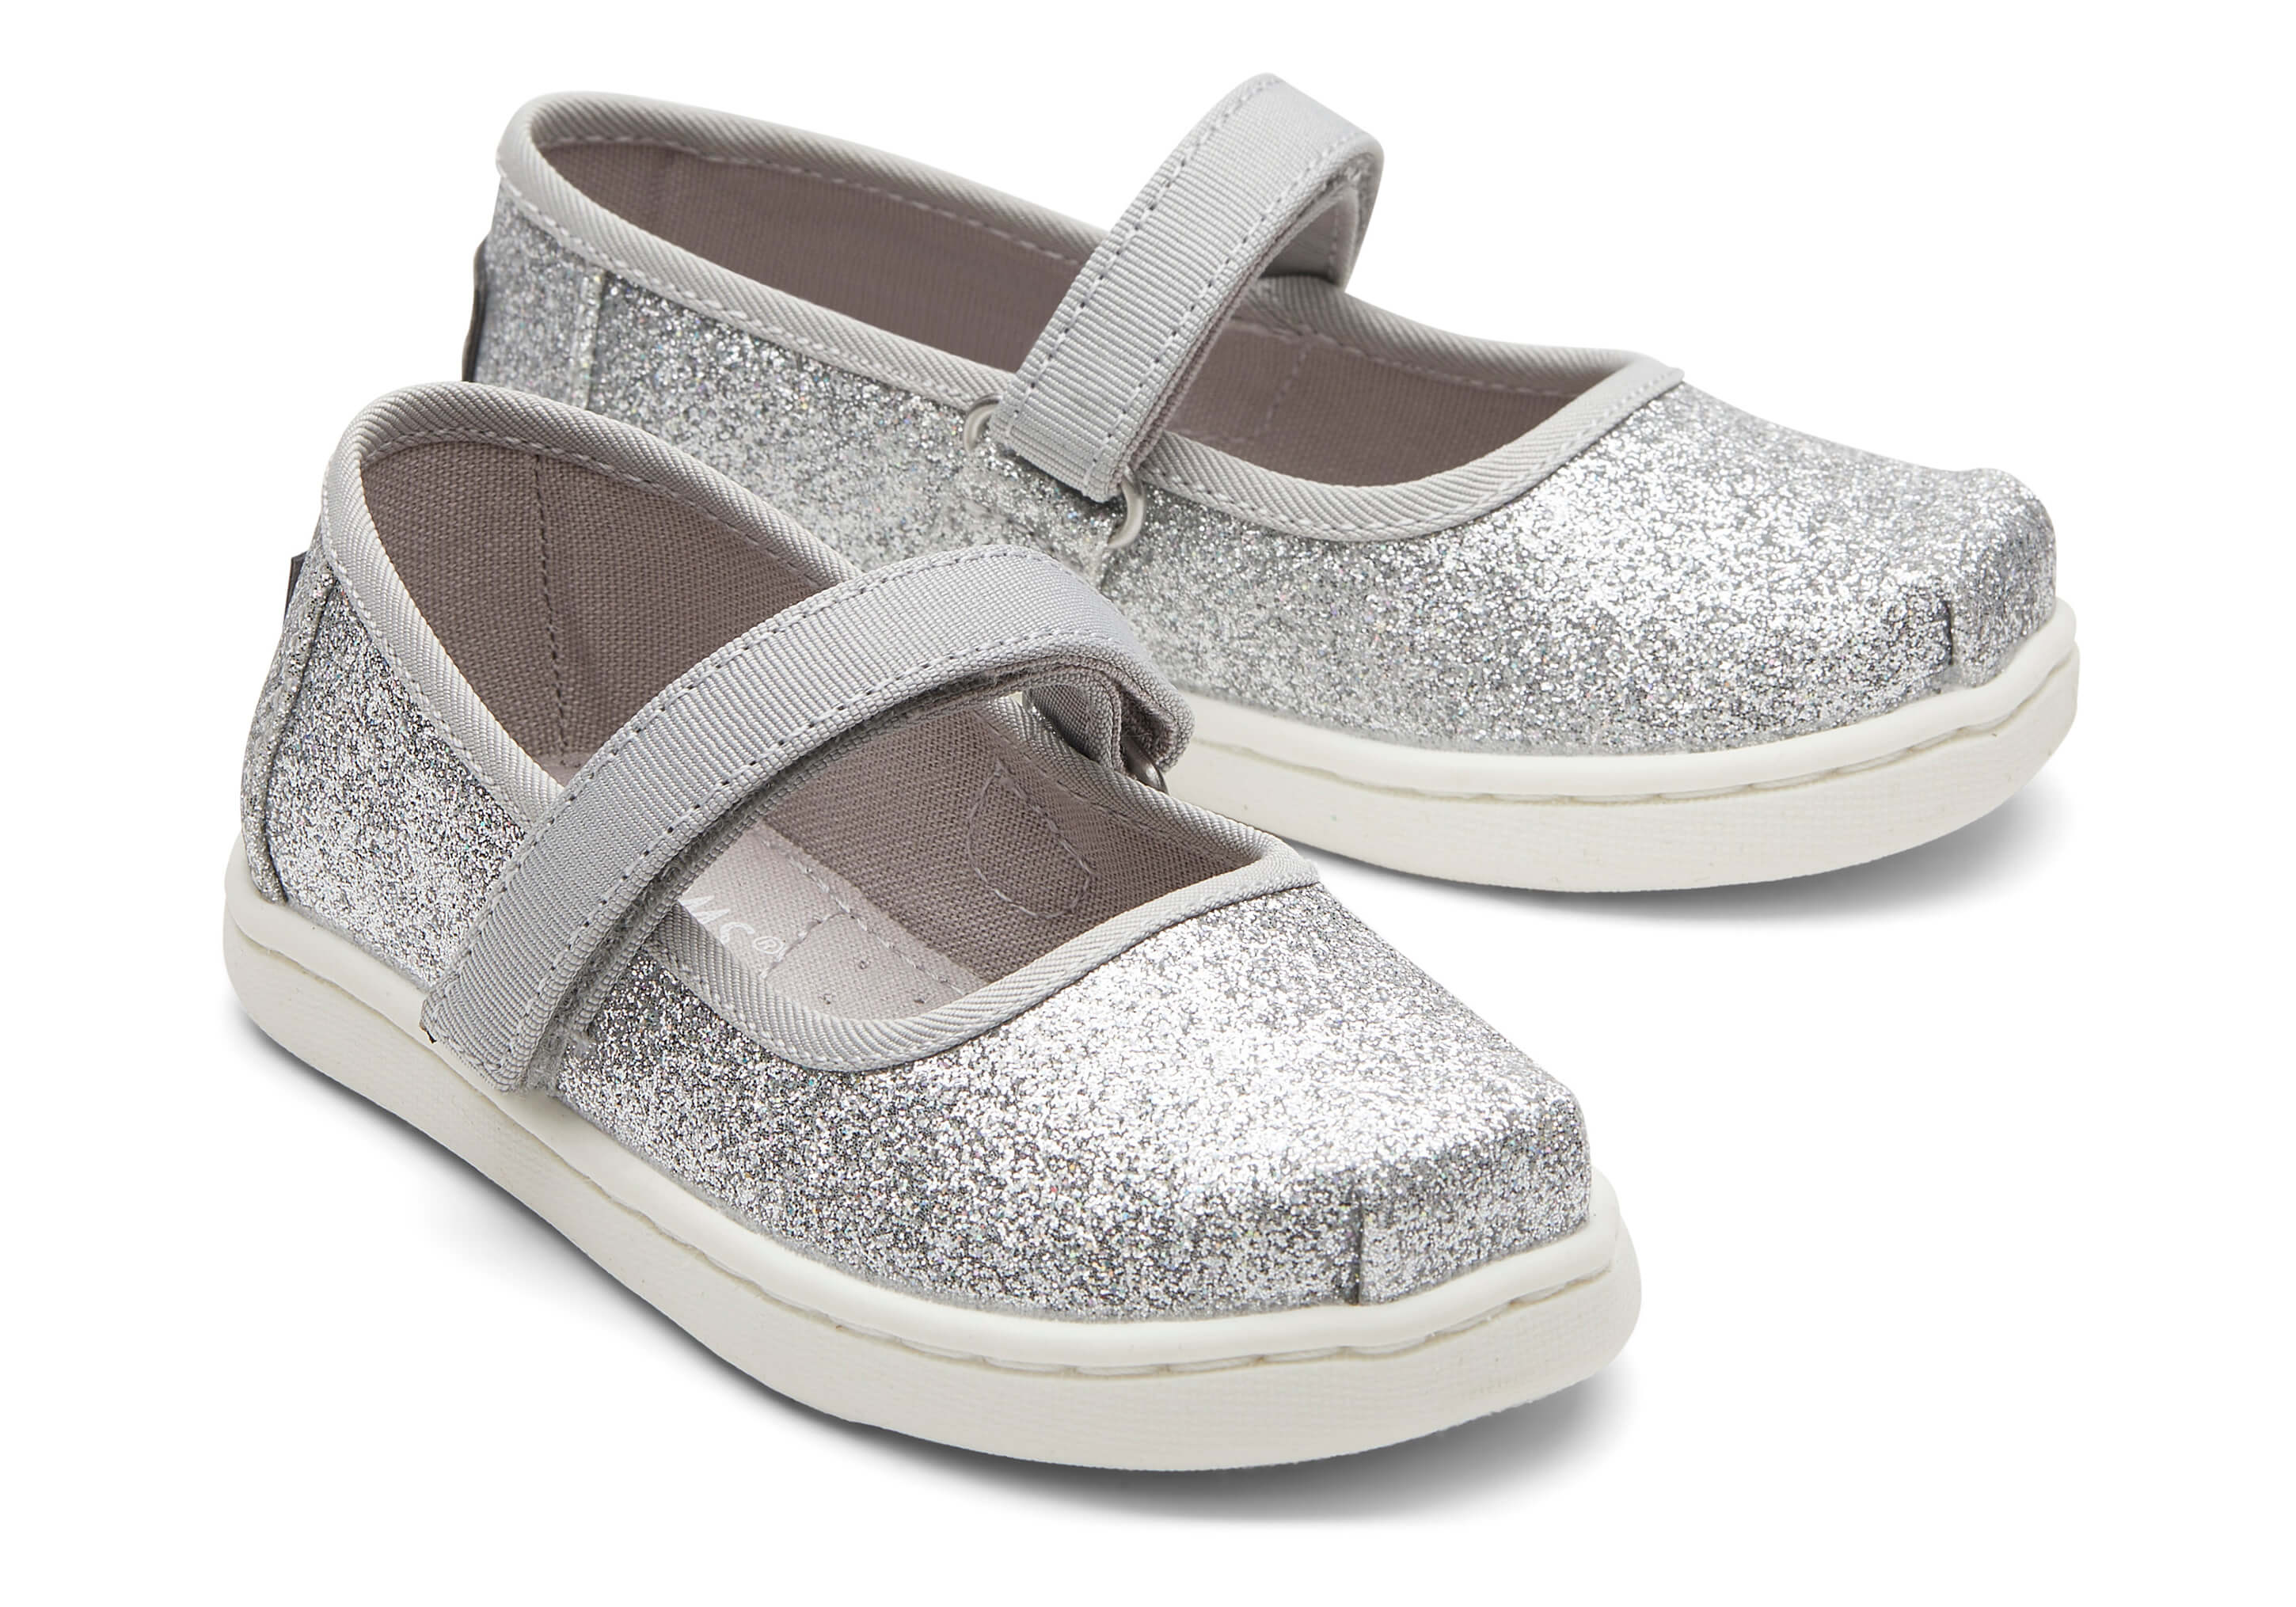 Toms Girl's Tiny Mary Jane Sneakers